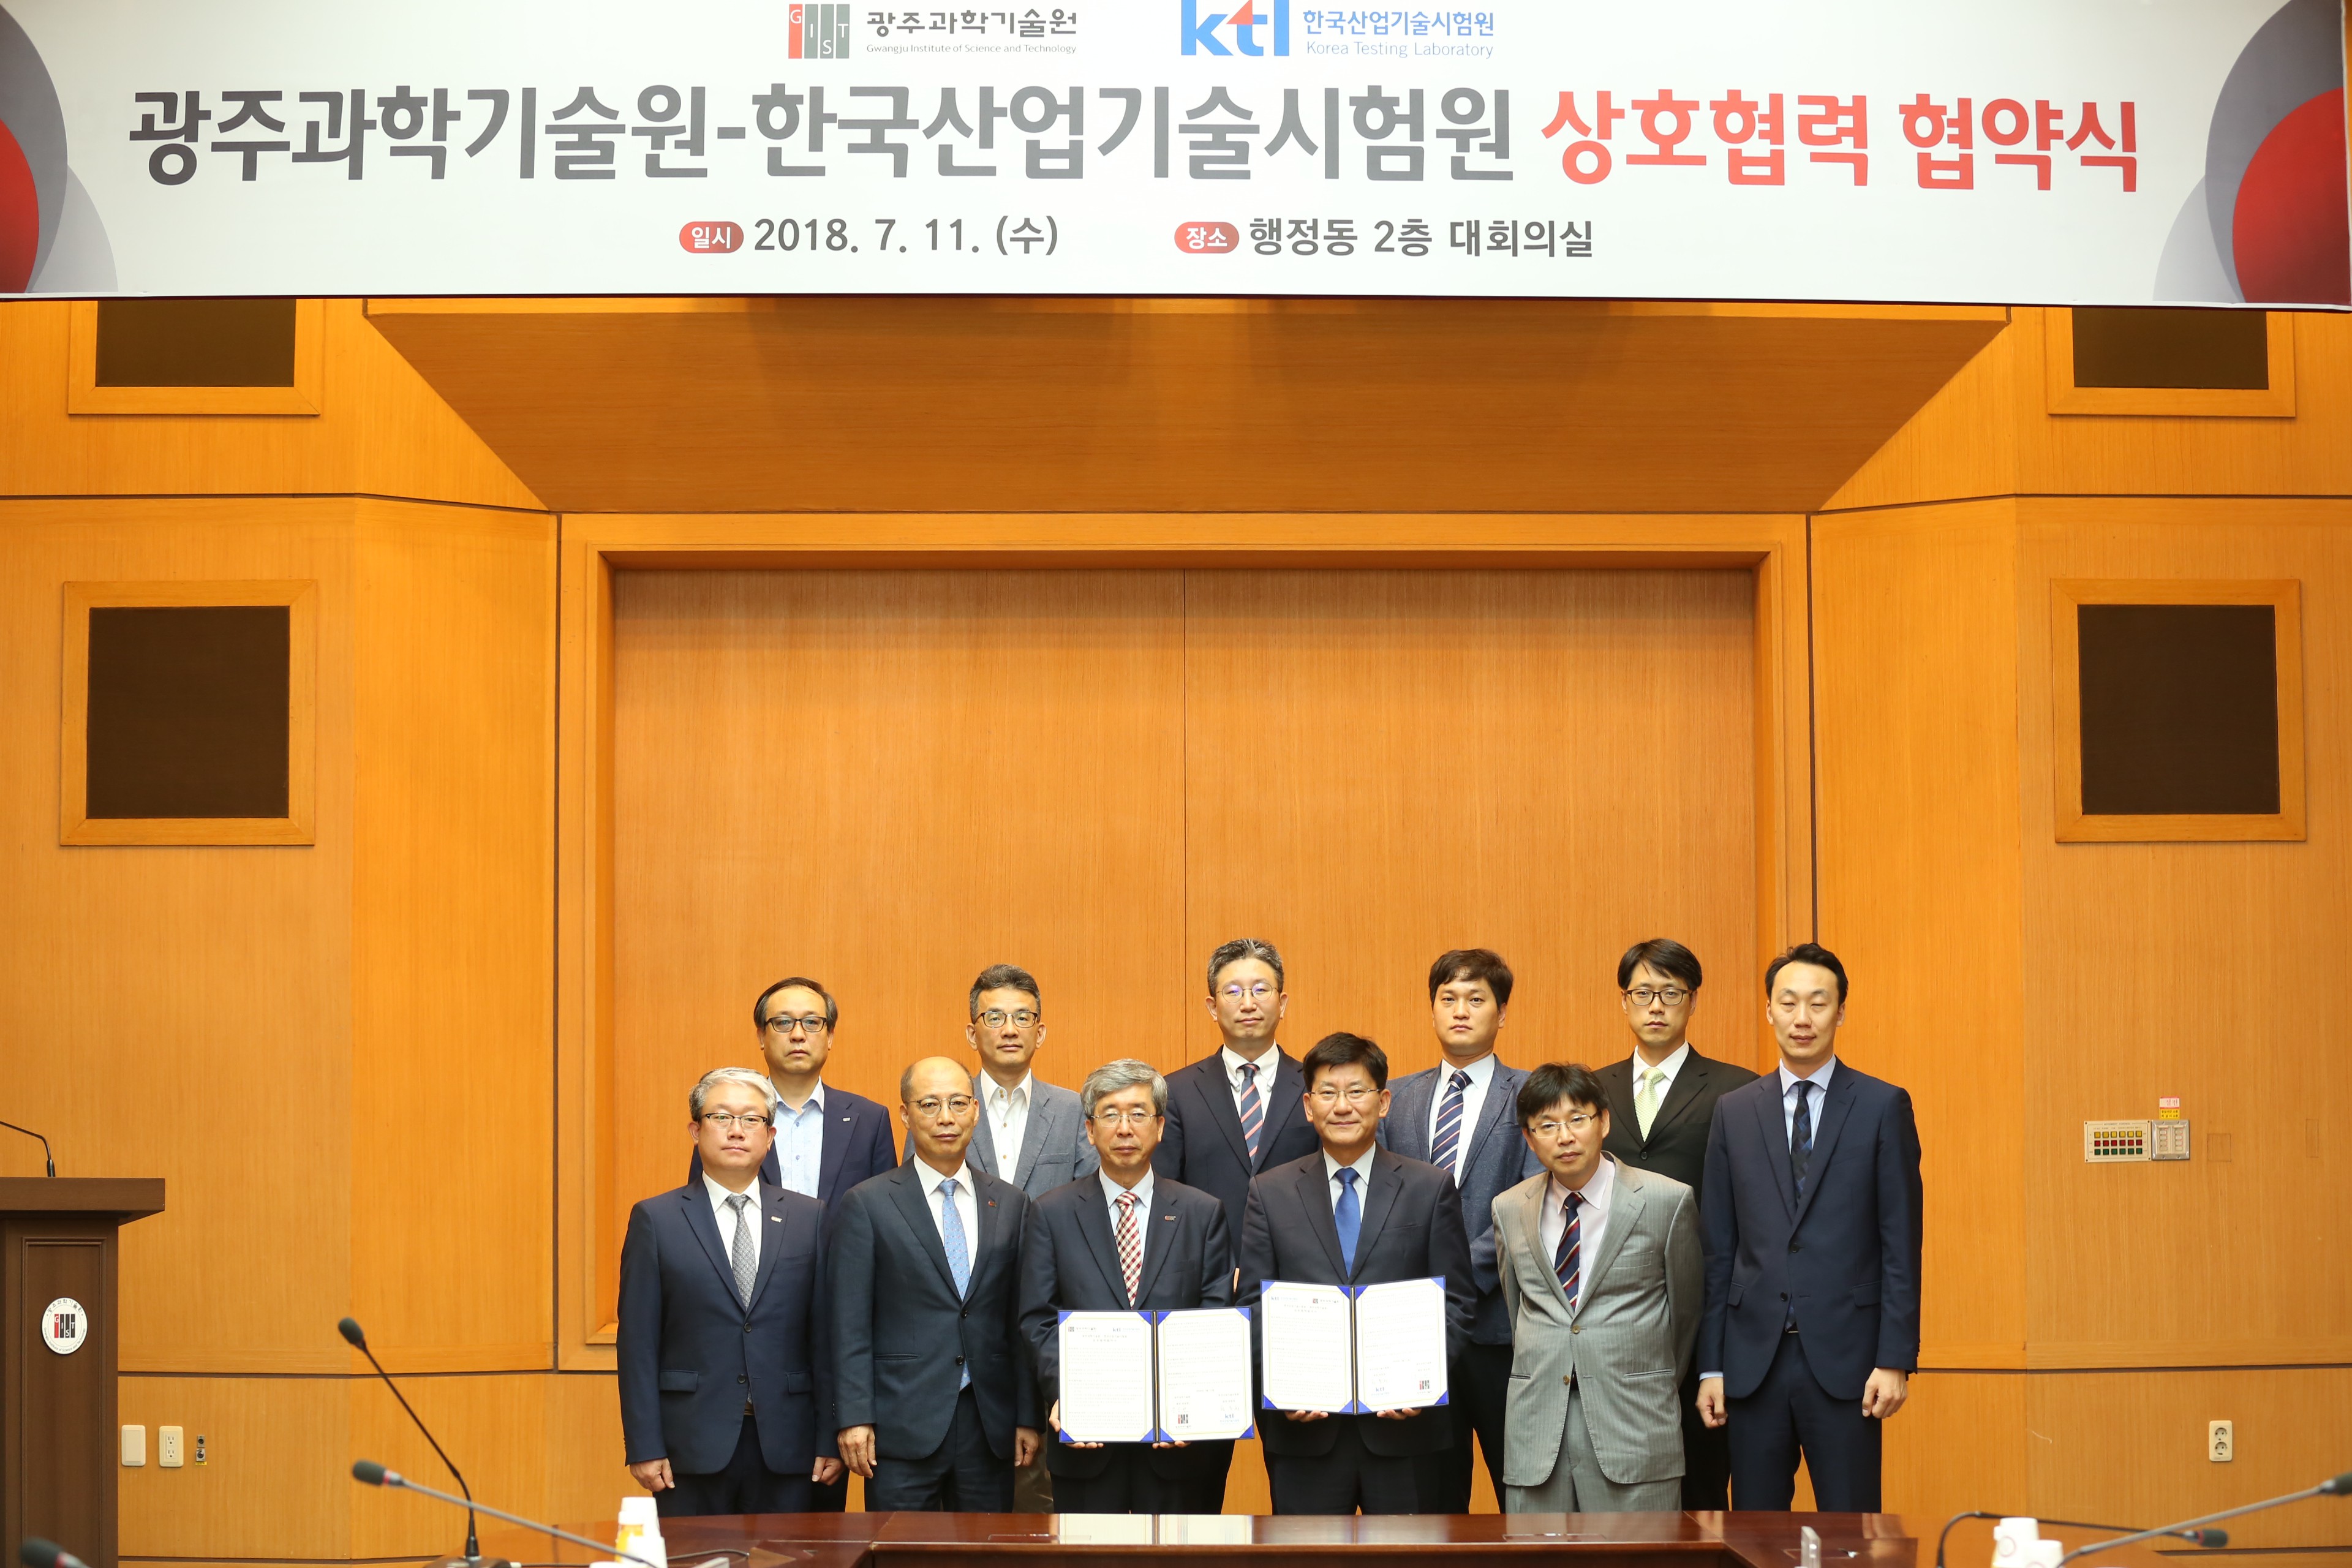 GIST and KTL (Korea Testing Laboratory) sign an MoU to cooperate on AI industrial development! 이미지